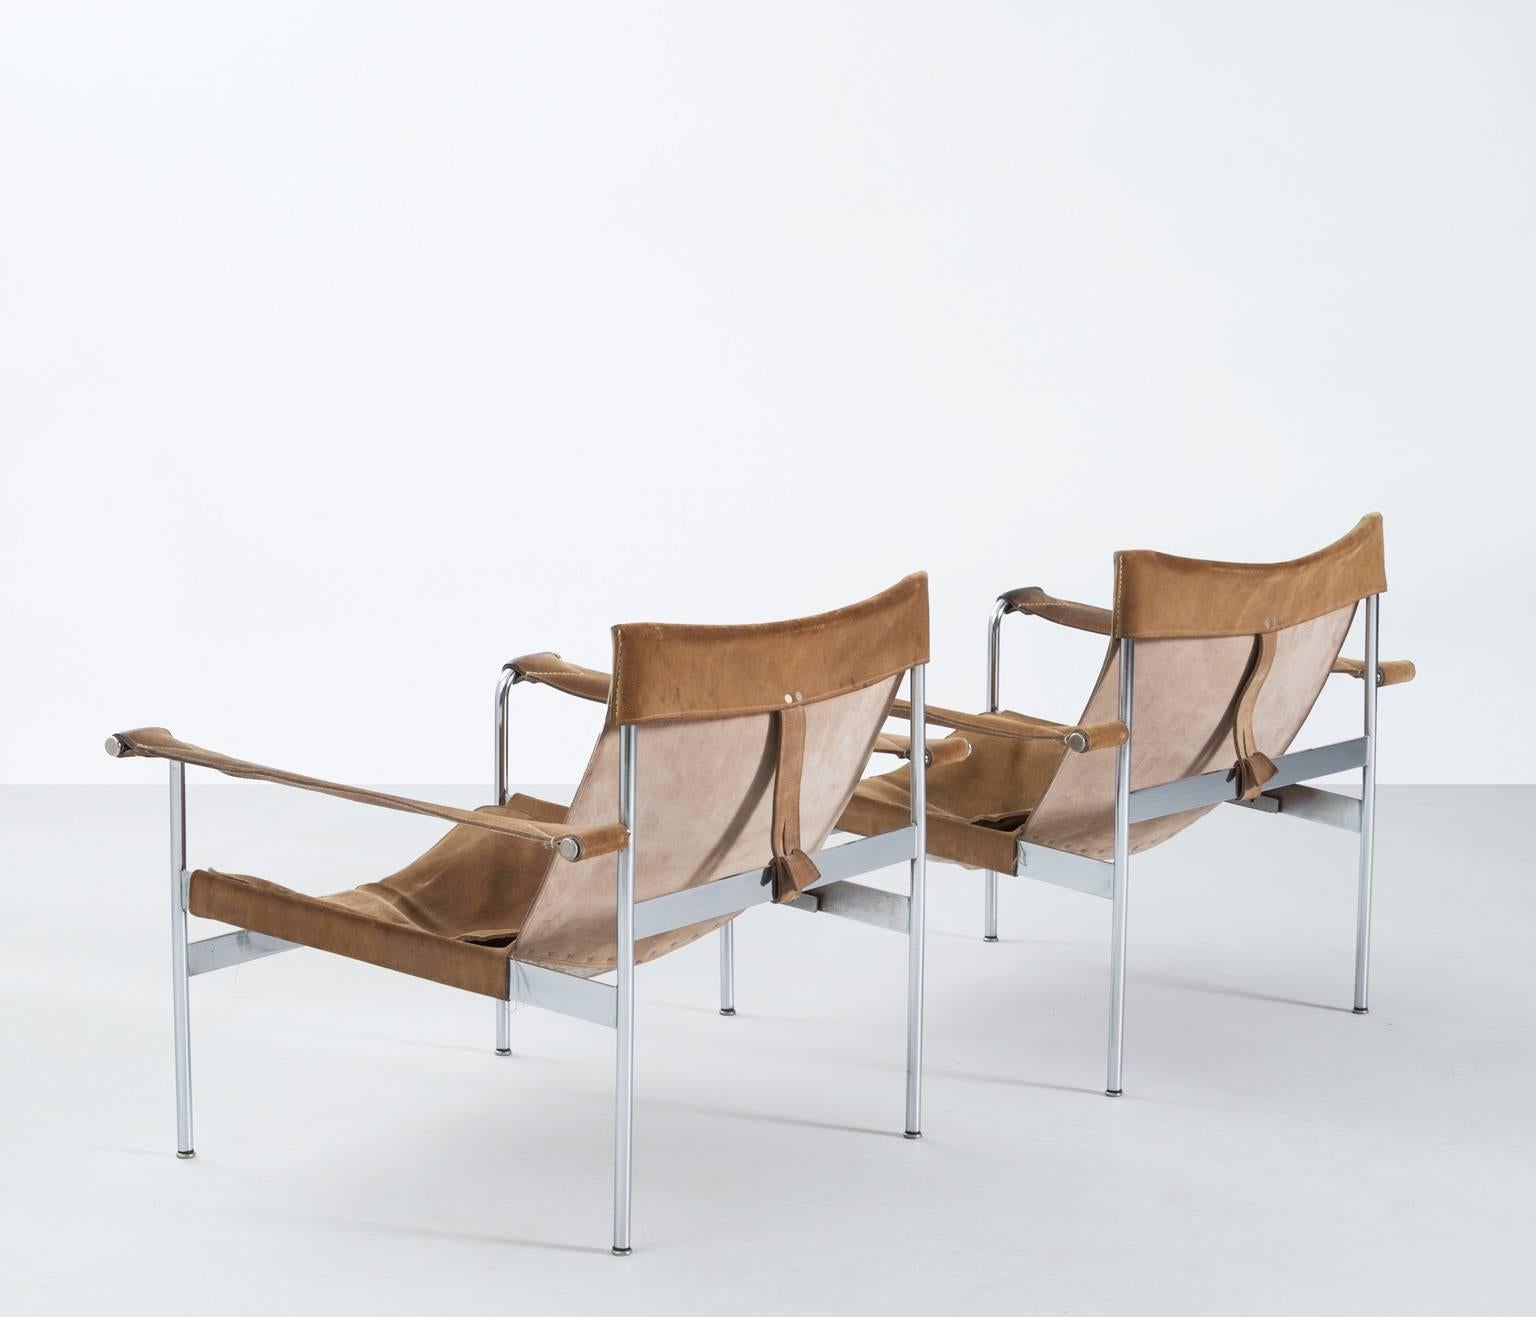 Set of two suede lounge chairs designed by the architect and founder of company Tecta, Hans Könecke, Germany, 1960s.

The chairs are build from a chrome-plated metal frame and are both equally upholstered in a high quality light brown suede